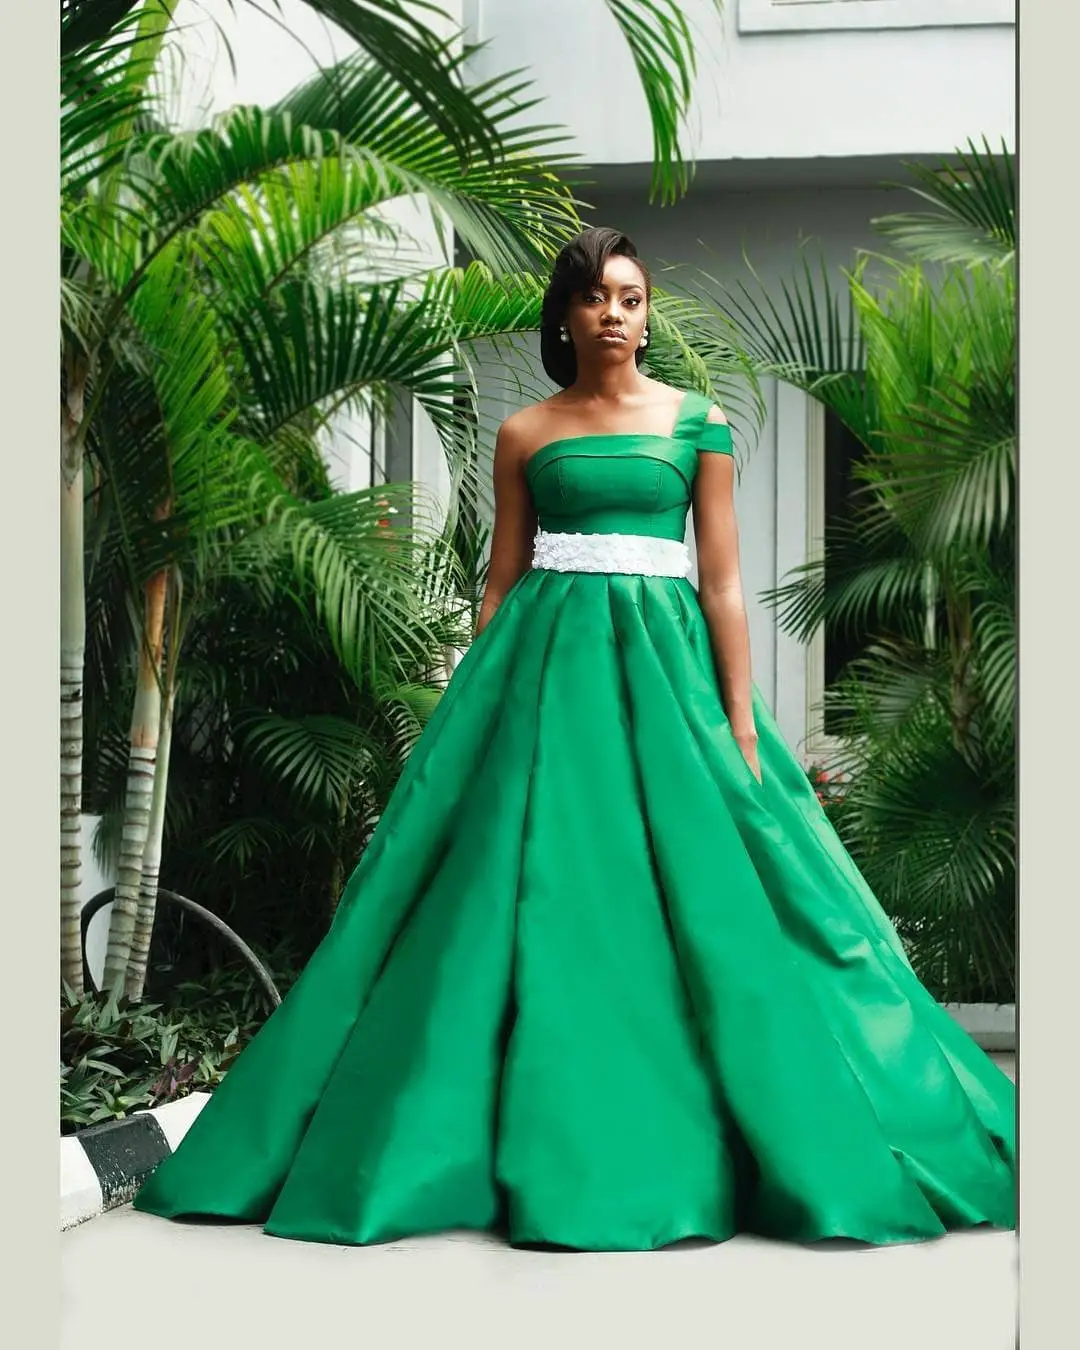 Let Nigerian Designers Show You How Fashion Is Done!